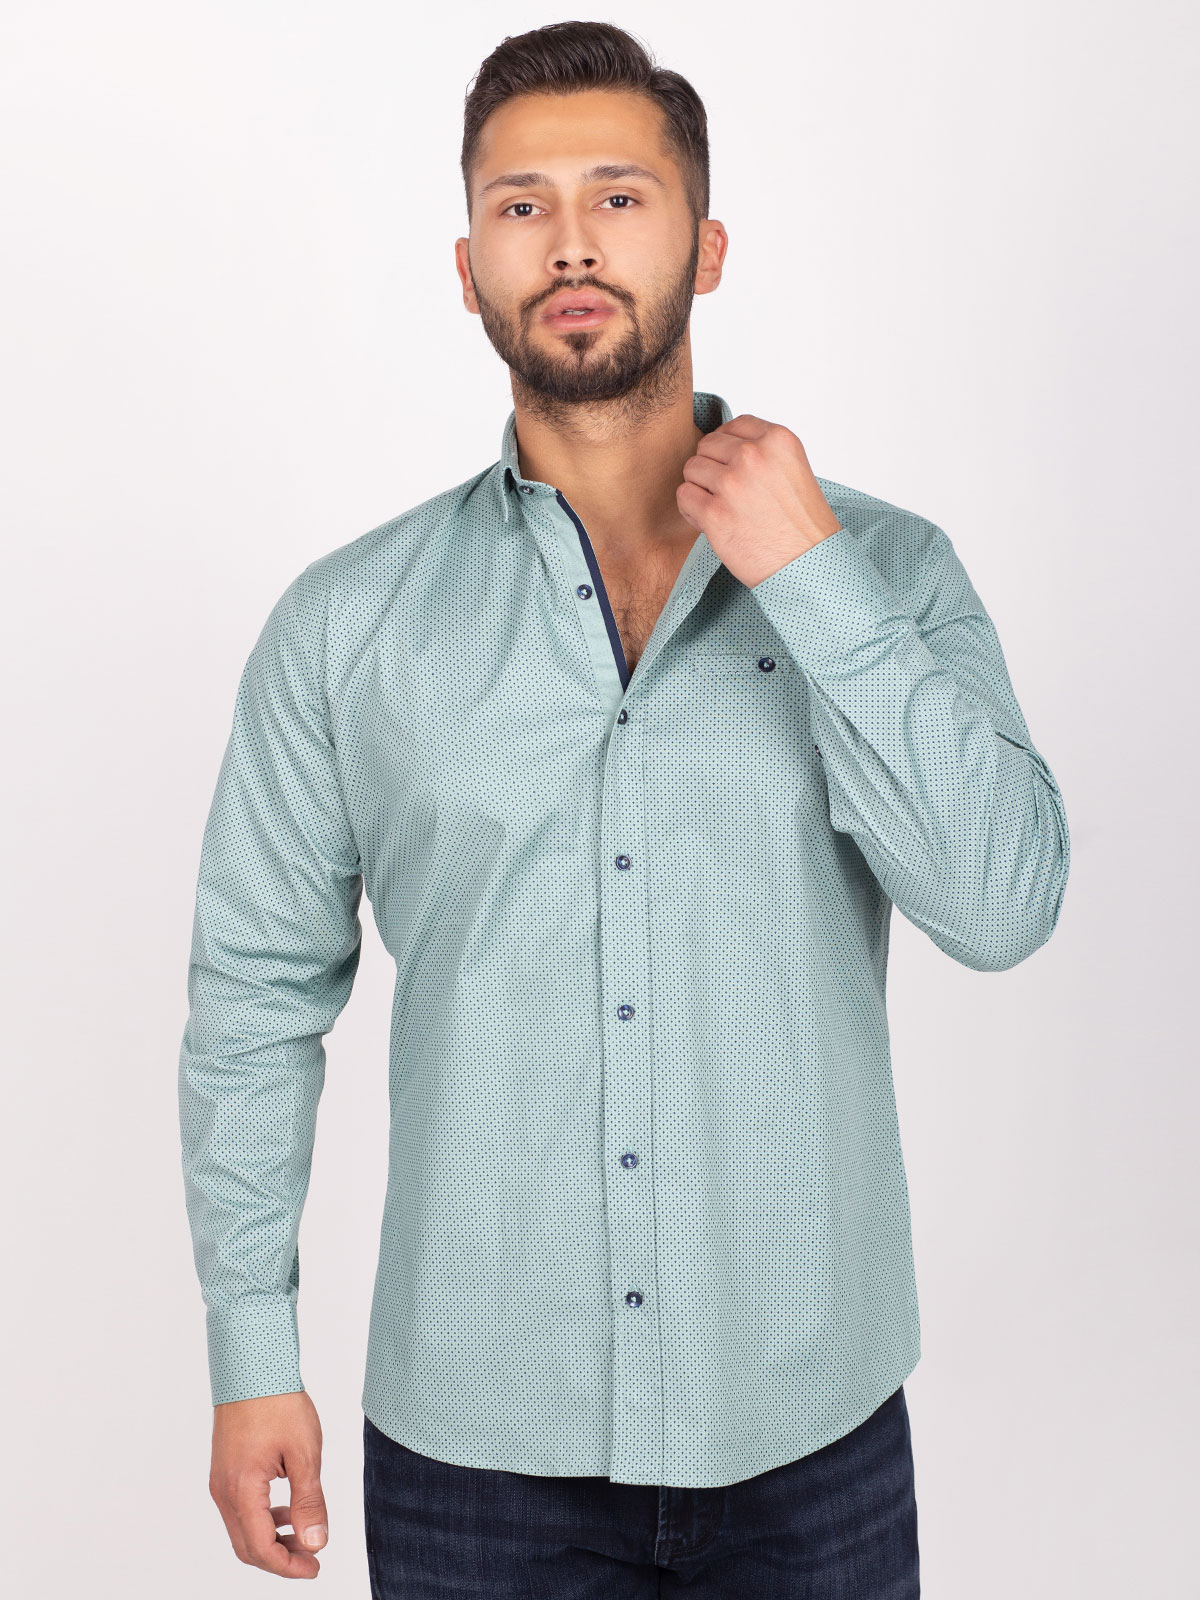 Shirt in mint color with blue patterns - 21509 € 43.87 img2